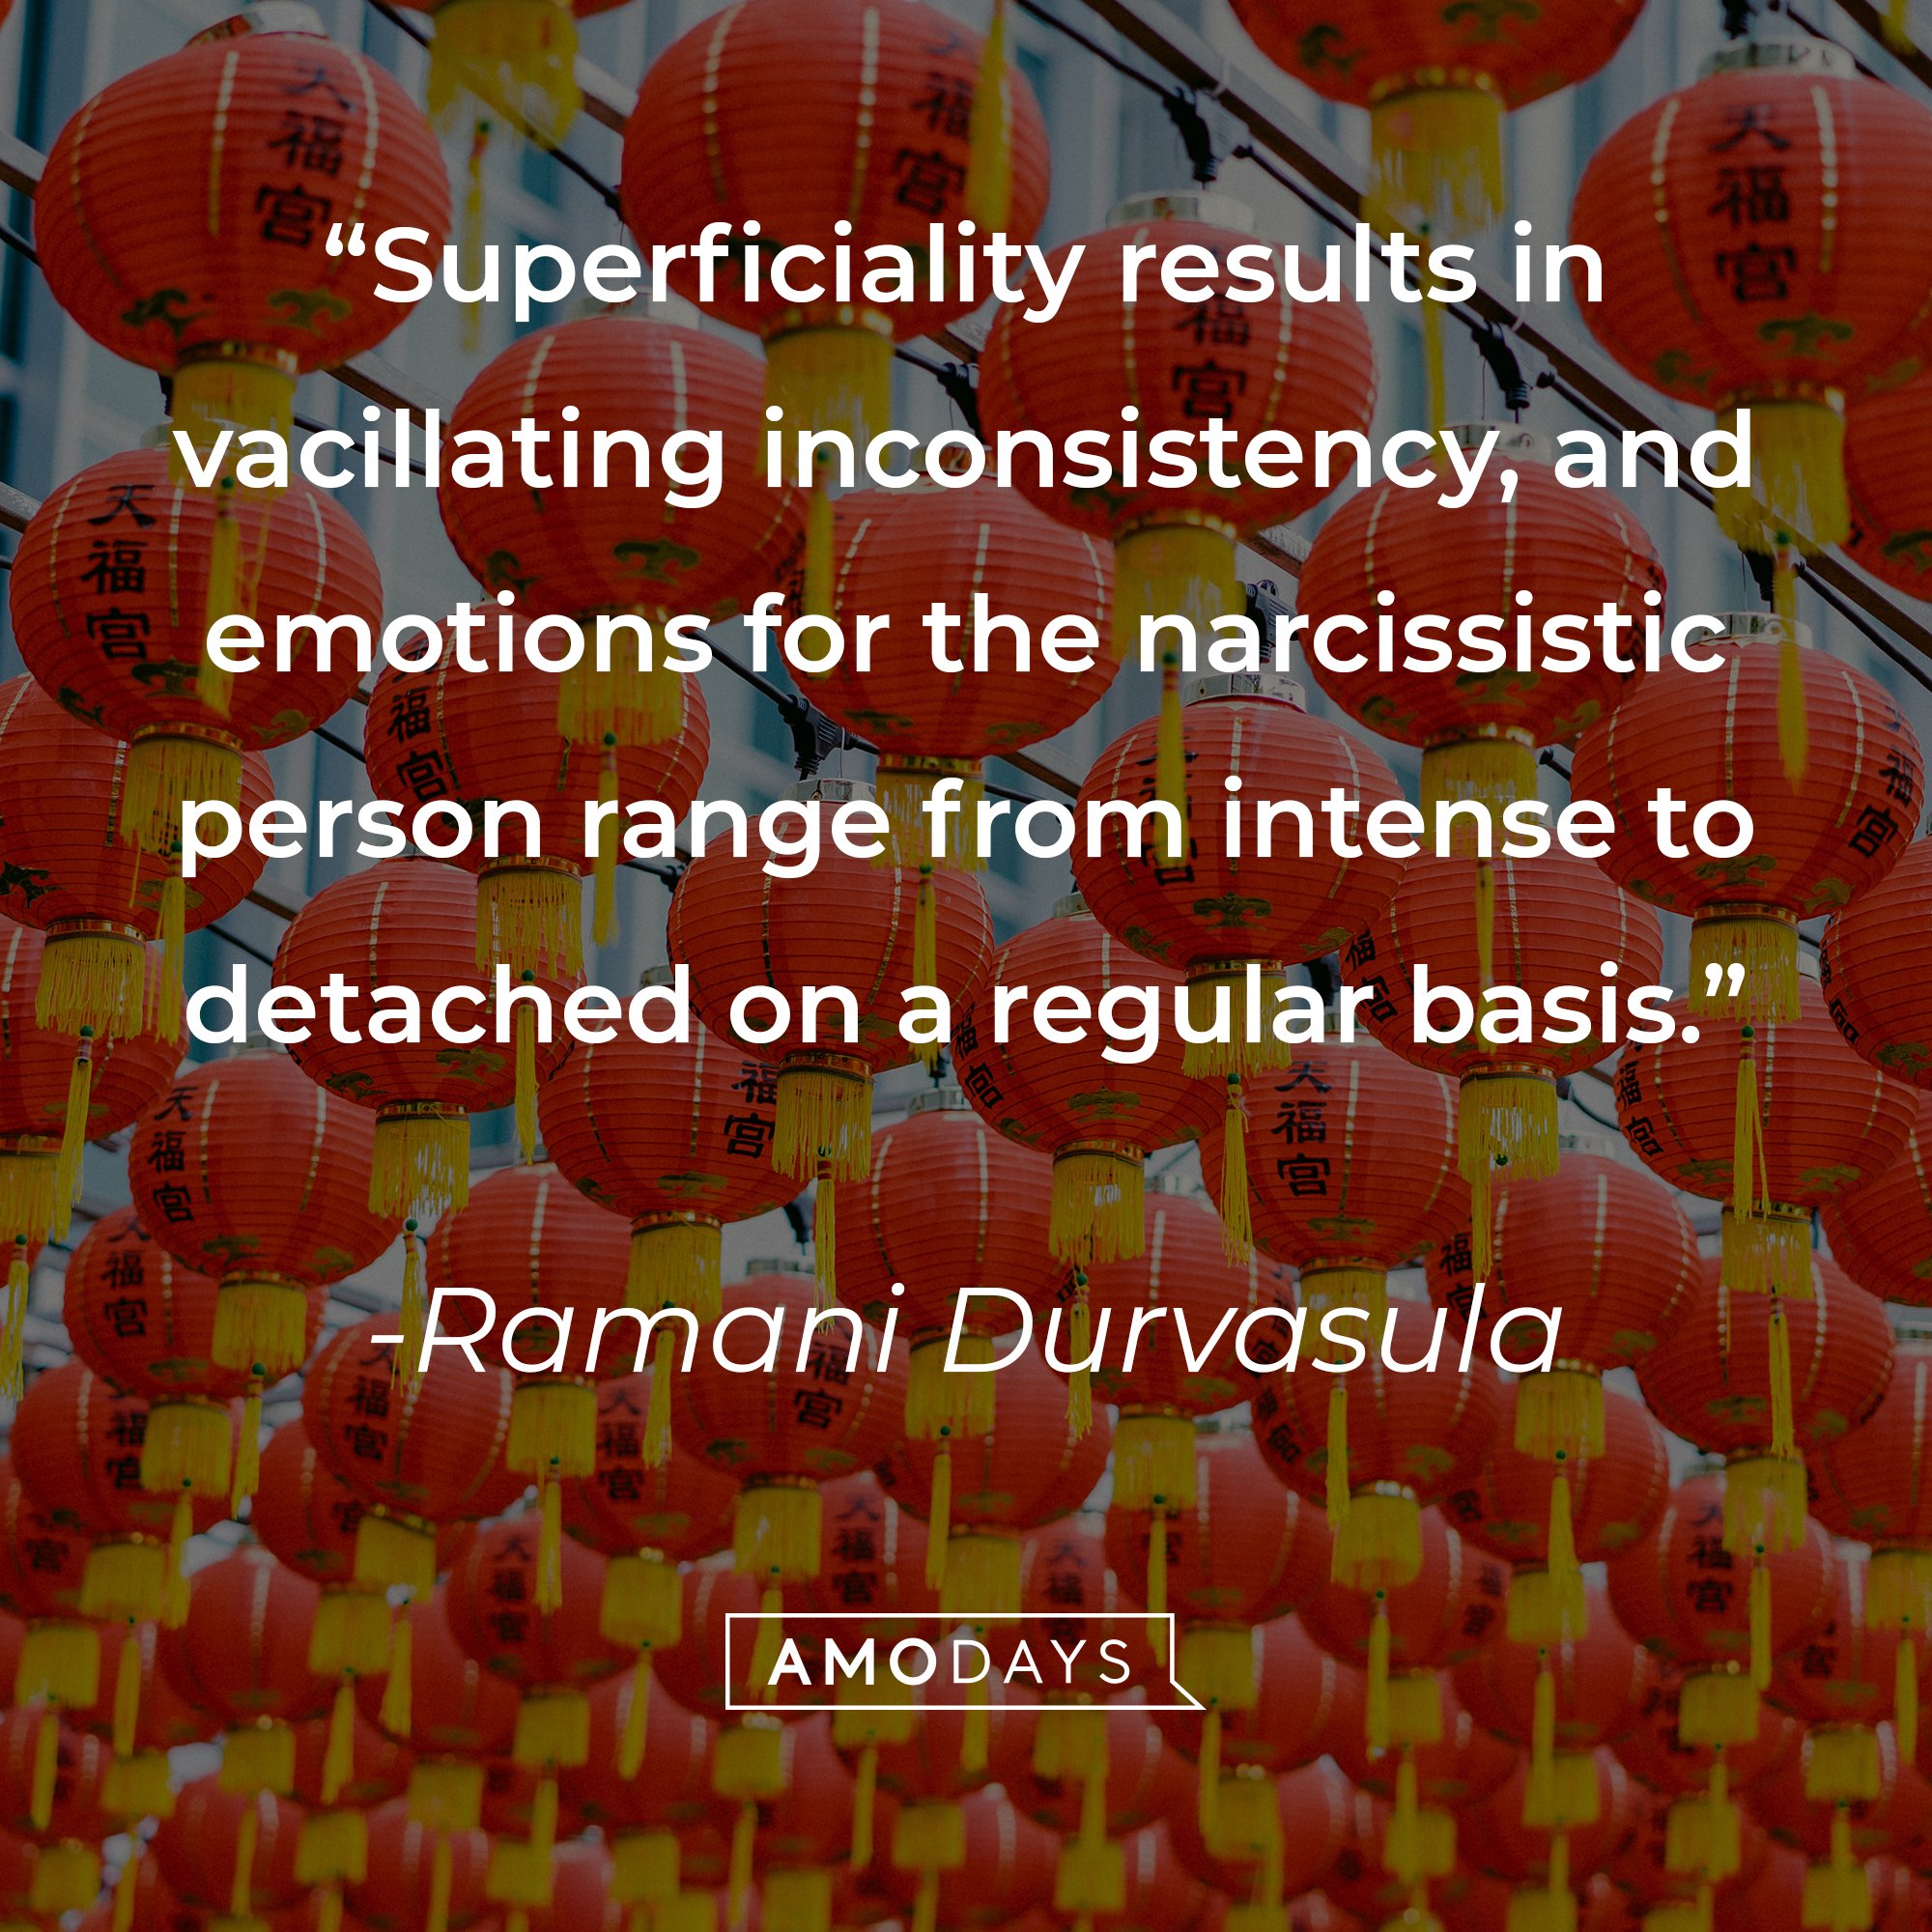 Ramani Durvasula's quote: "Superficiality results in vacillating inconsistency, and emotions for the narcissistic person range from intense to detached on a regular basis." | Image: AmoDays